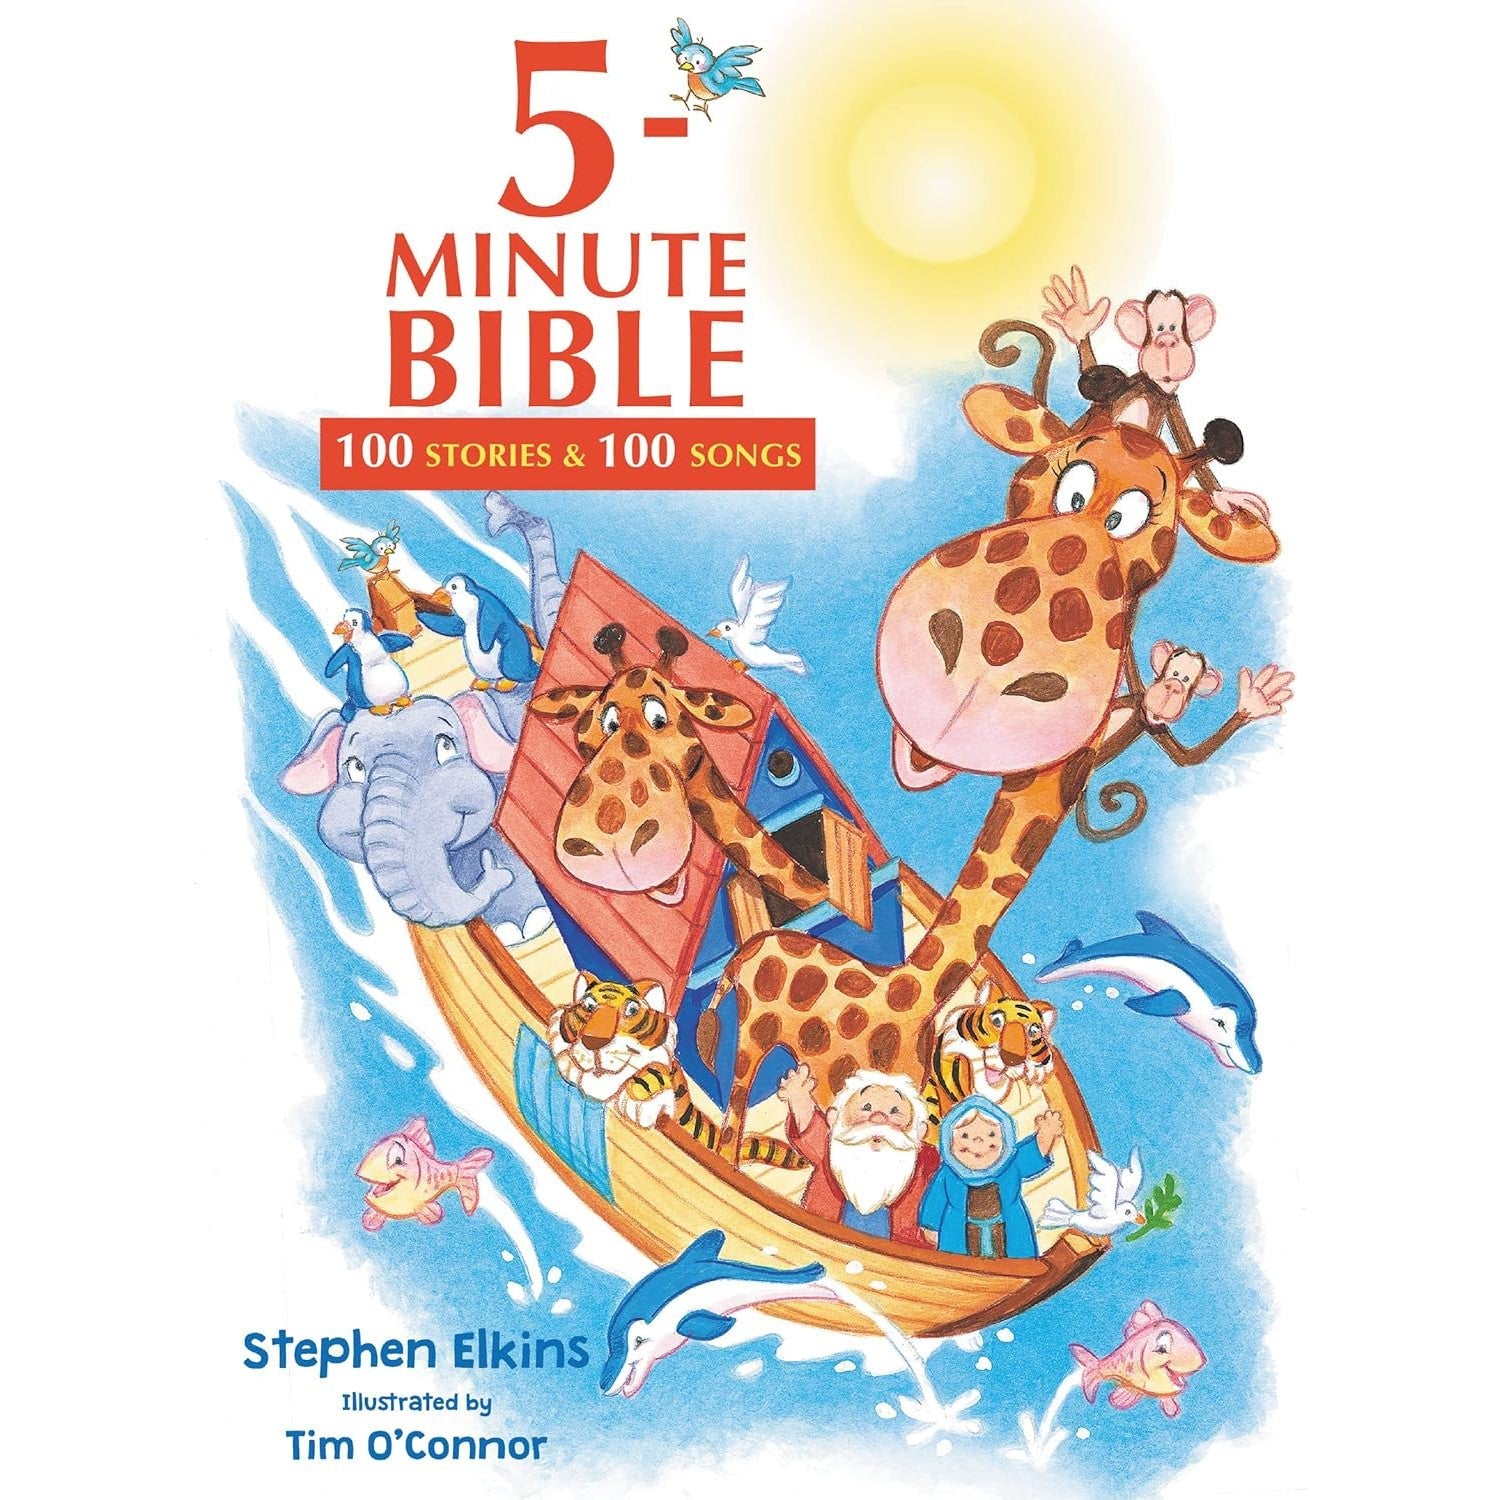 Thomas Nelson: 5-Minute Bible: 100 Stories and 100 Songs-HARPER COLLINS PUBLISHERS-Little Giant Kidz